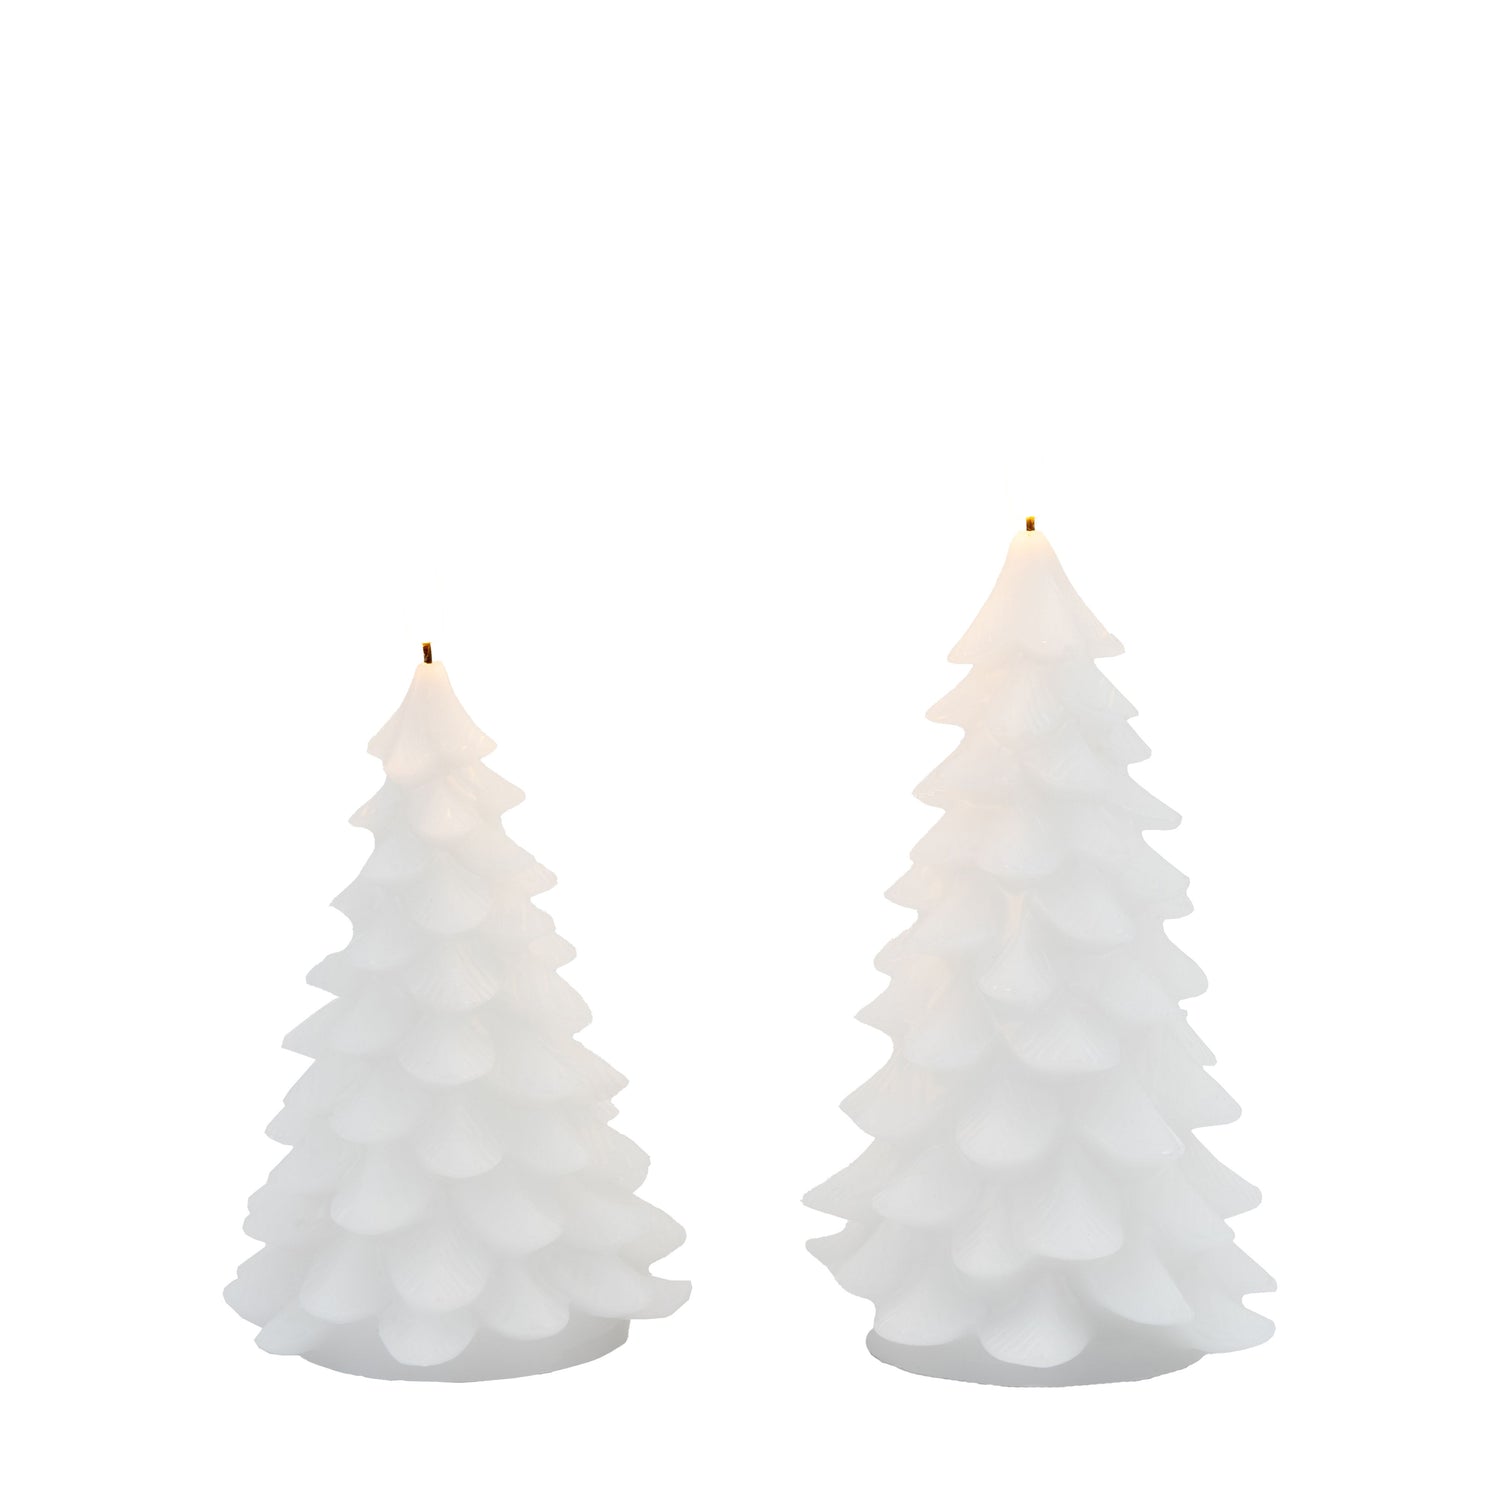  GalleryDirect-Gallery Interiors Set of 2 LED Xmas Tree Candles in White-White 165 